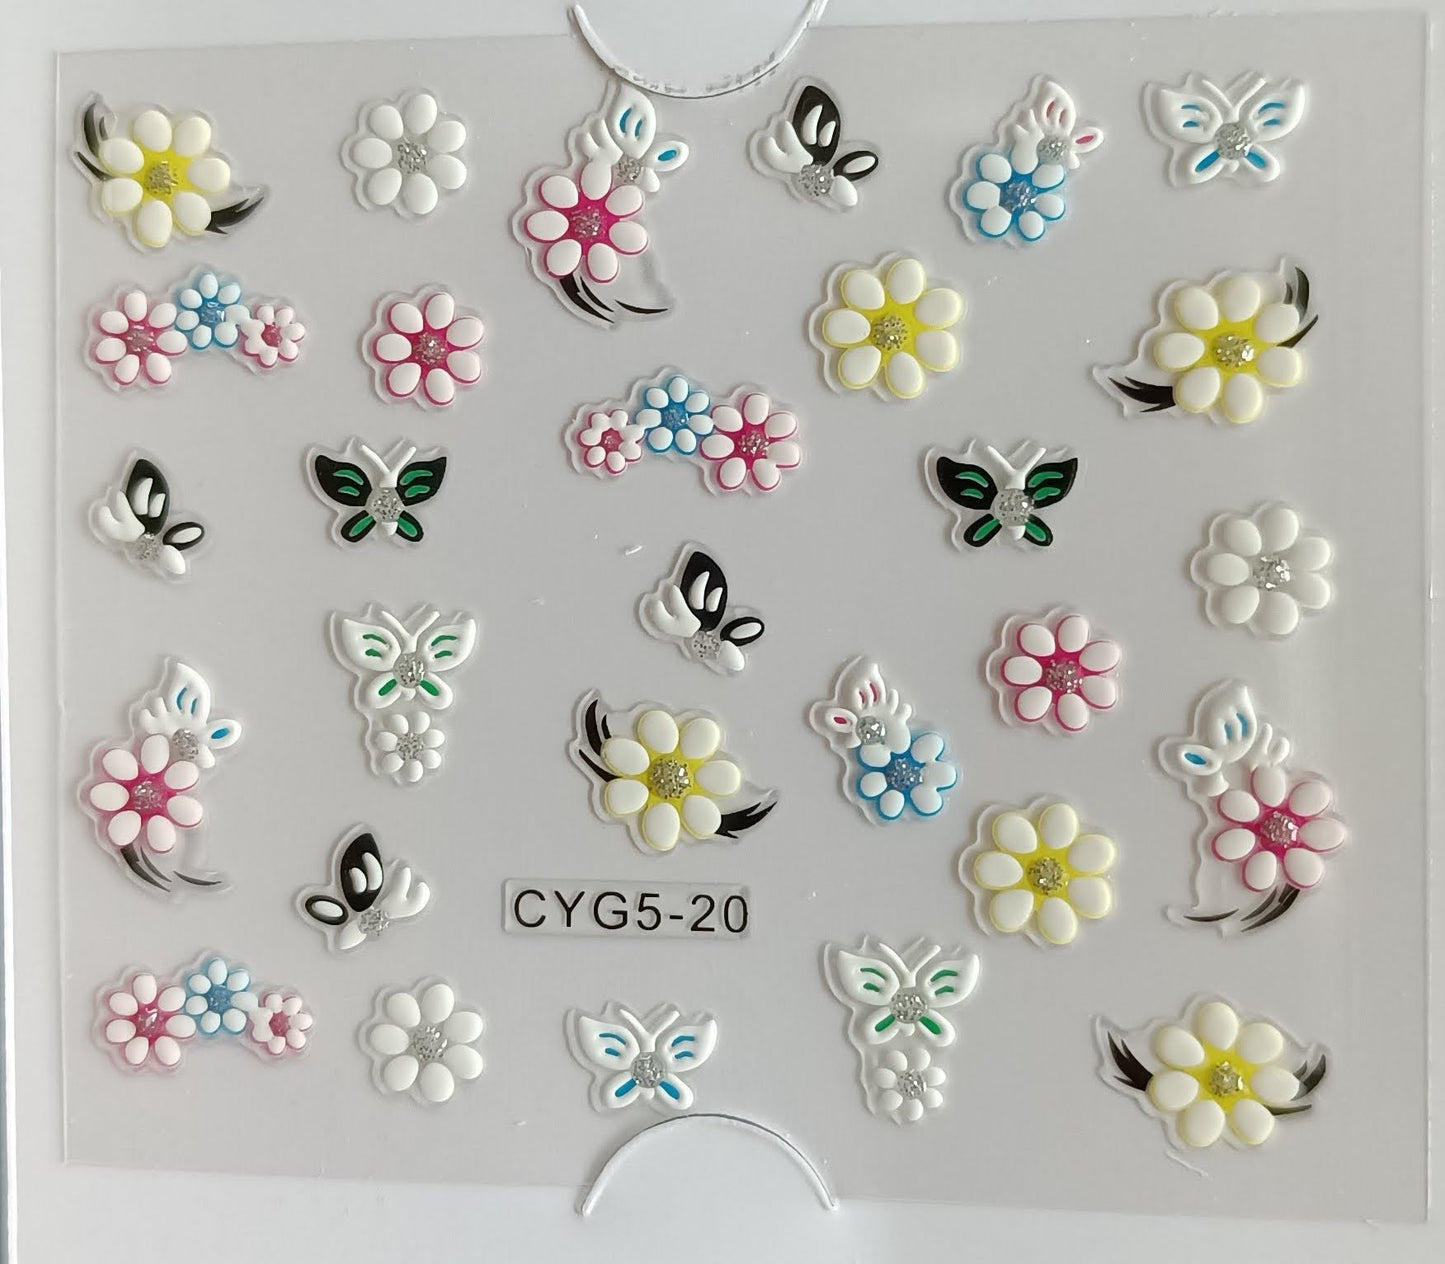 3D Self-Adhesive Nail Art Stickers - Multicolor Flowers & Butterflies 20